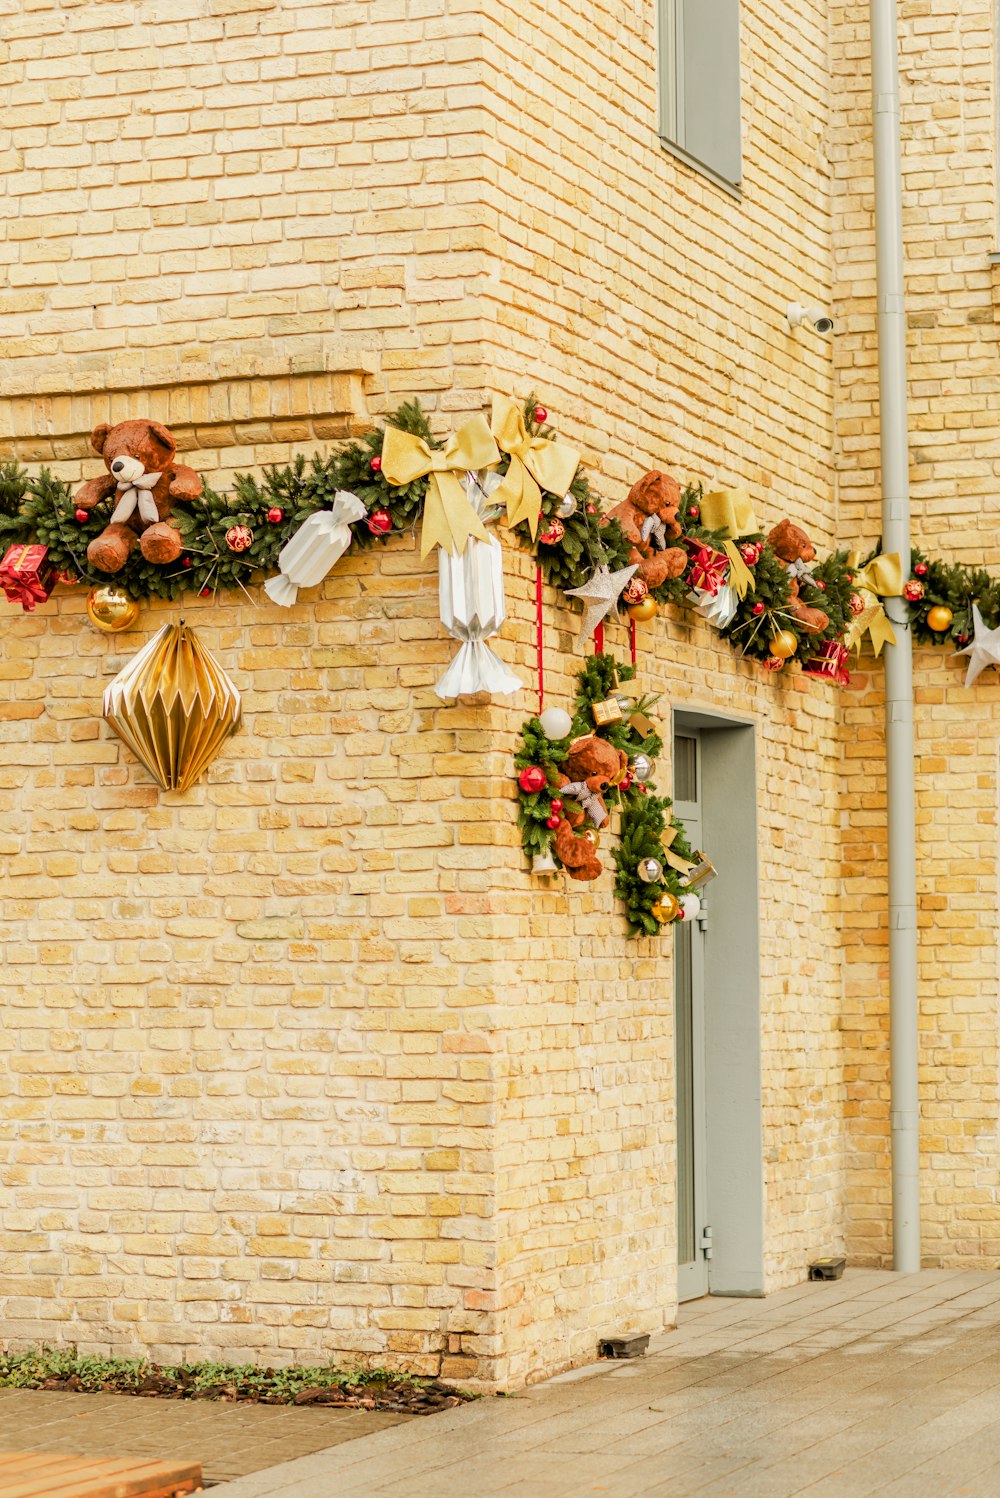 a brick building with a large wreath of flowers from the roof